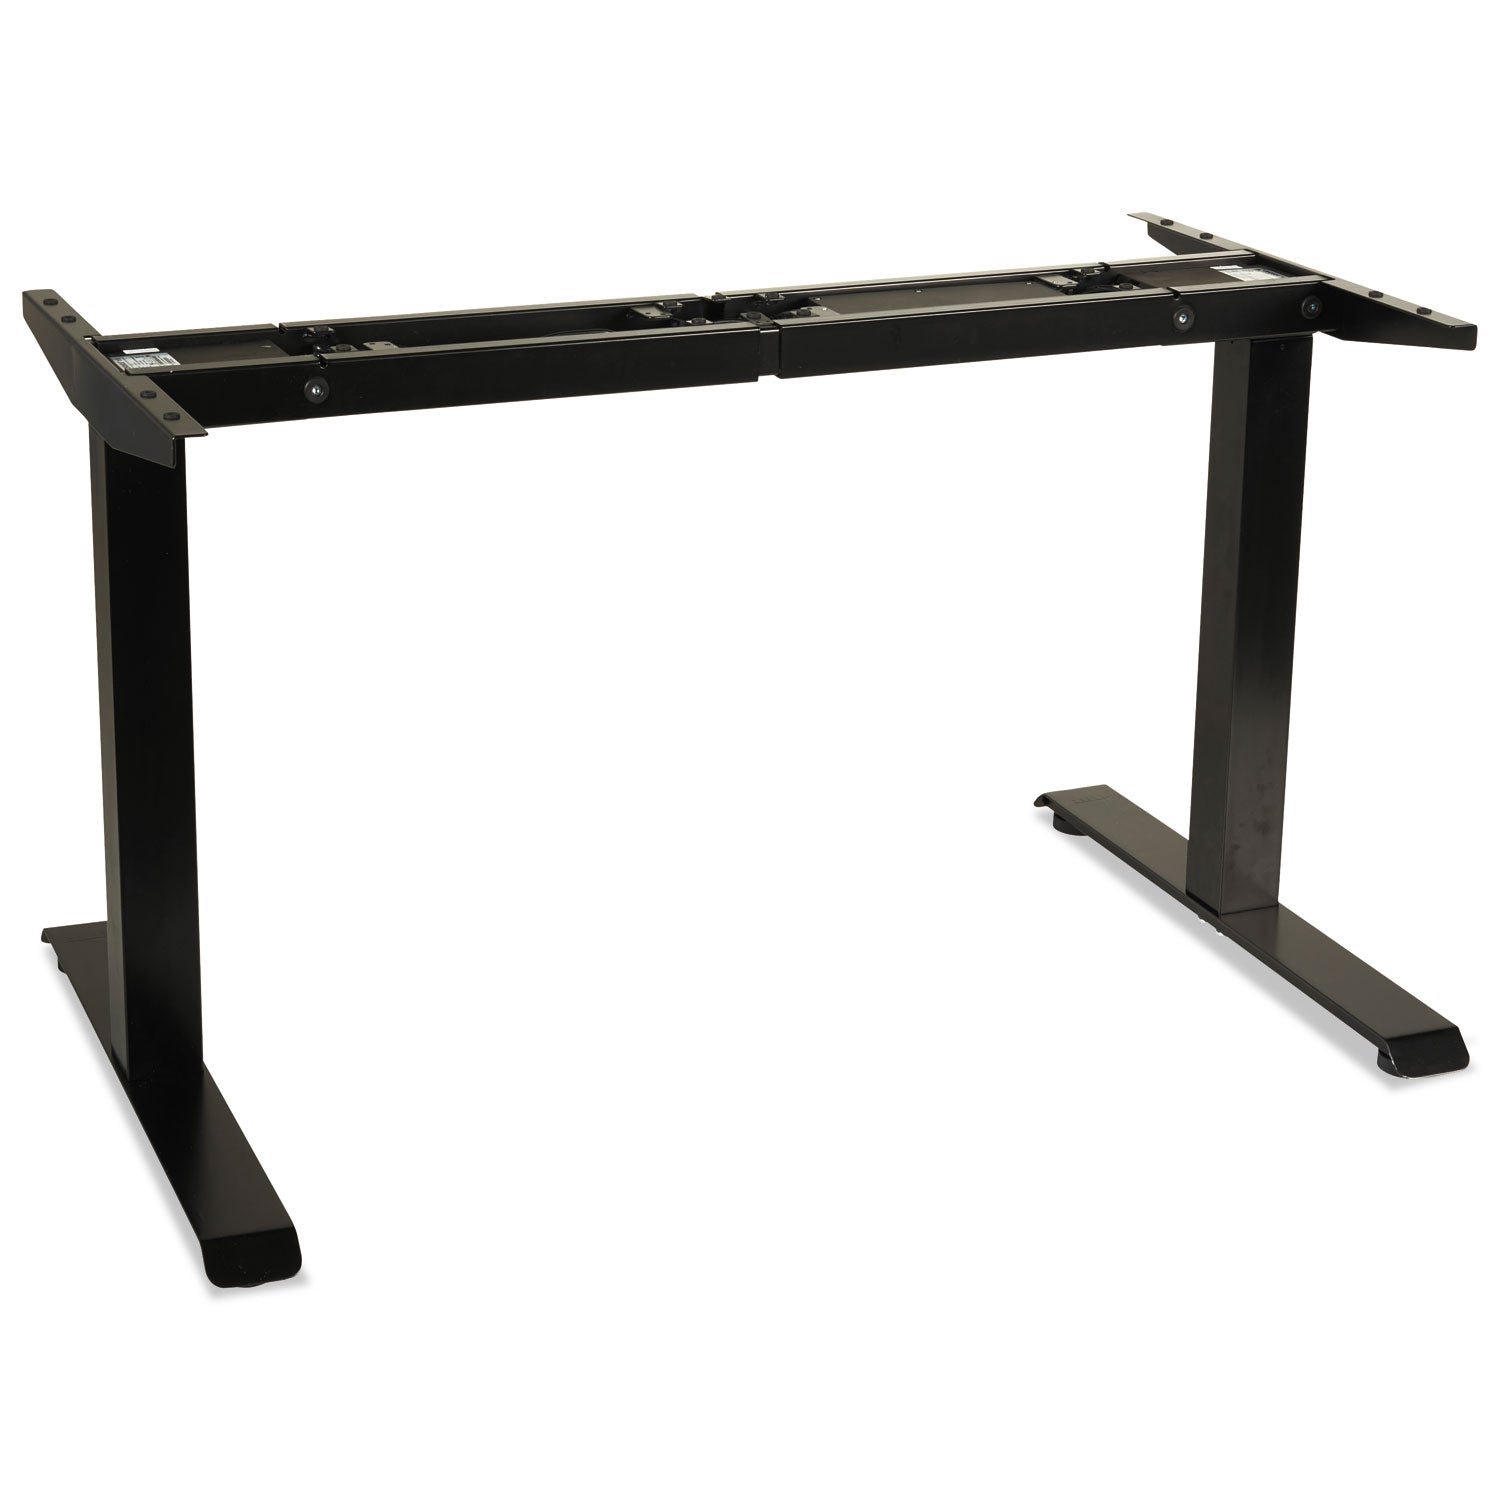 adaptivergo-sit-stand-two-stage-electric-height-adjustable-table-base-4806-x-2435-x-275-to-472-black_aleht2ssb - 1